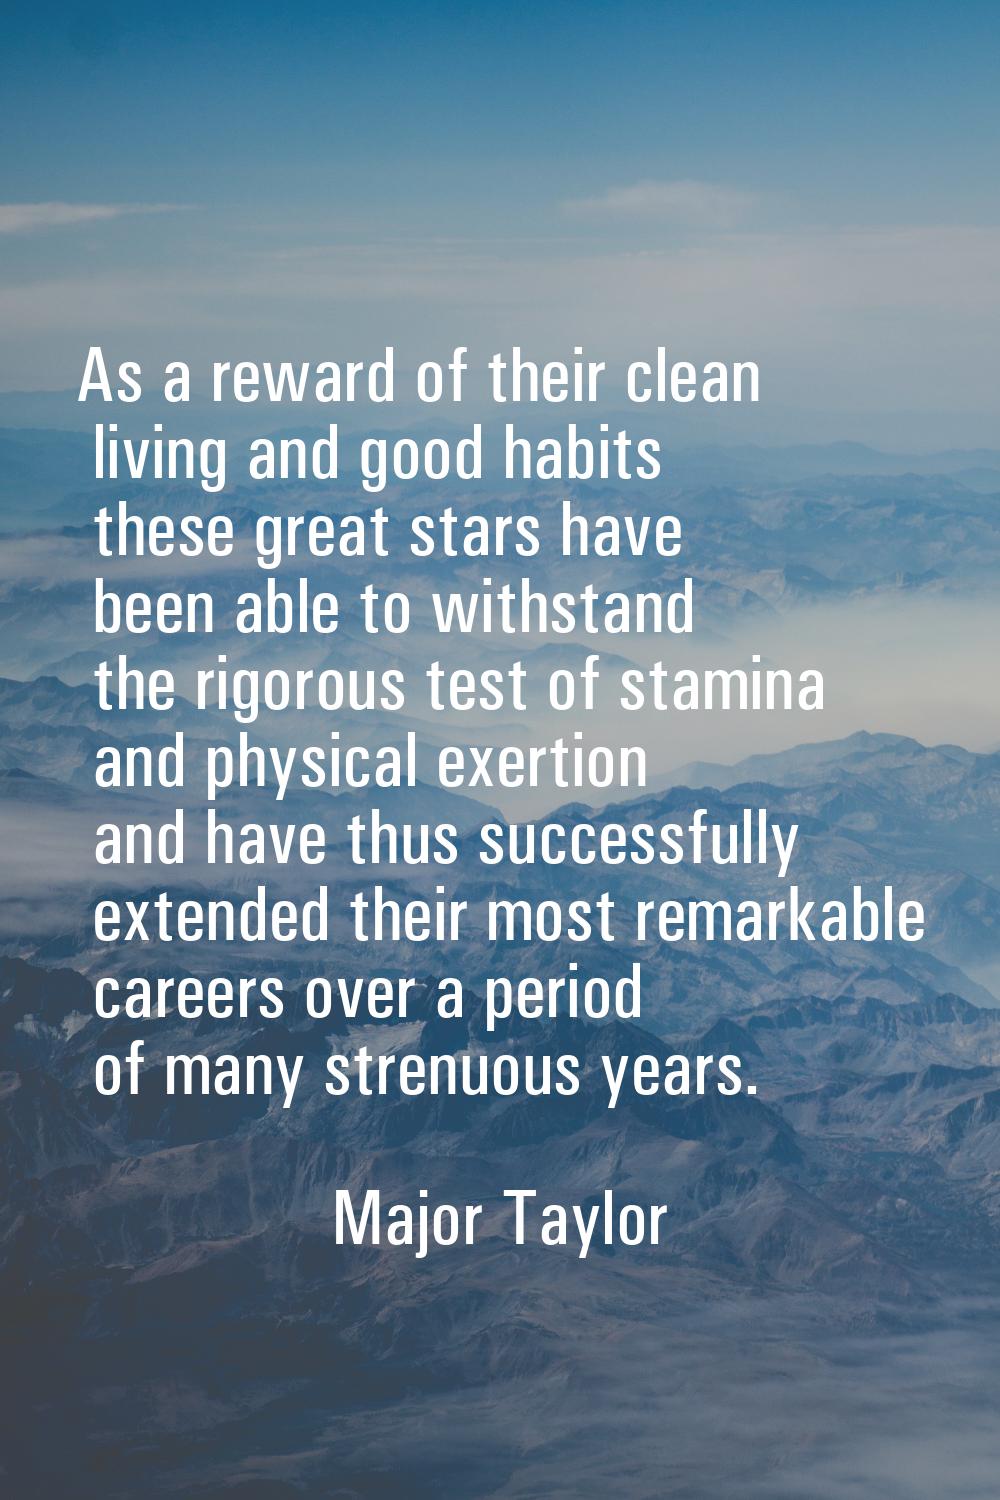 As a reward of their clean living and good habits these great stars have been able to withstand the